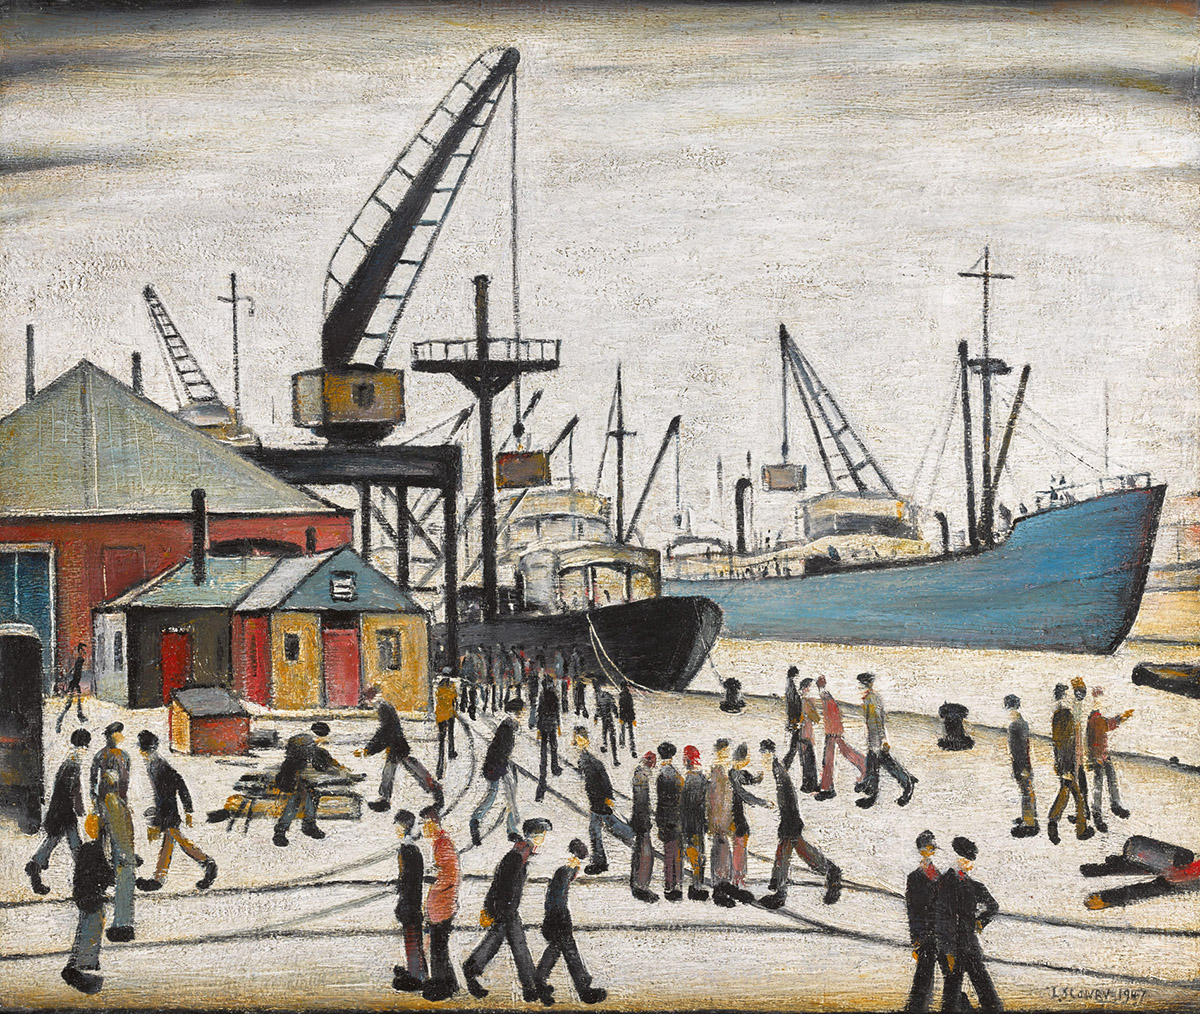 Painting of a shipping dock by L.S. Lowry